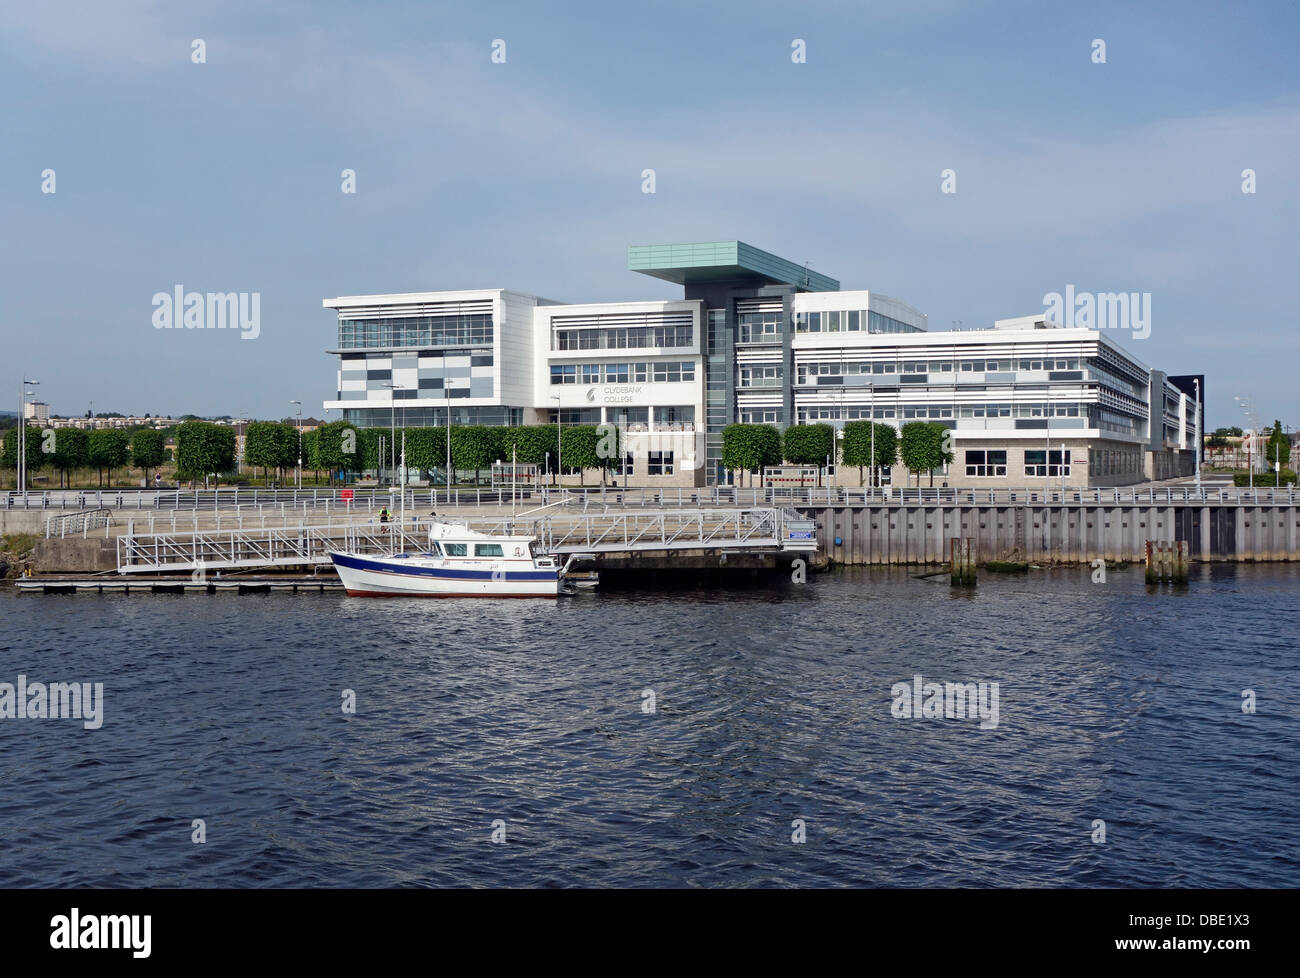 Clydebank college in Clydebank West Dunbartonshire Scozia come si vede dal Fiume Clyde Foto Stock